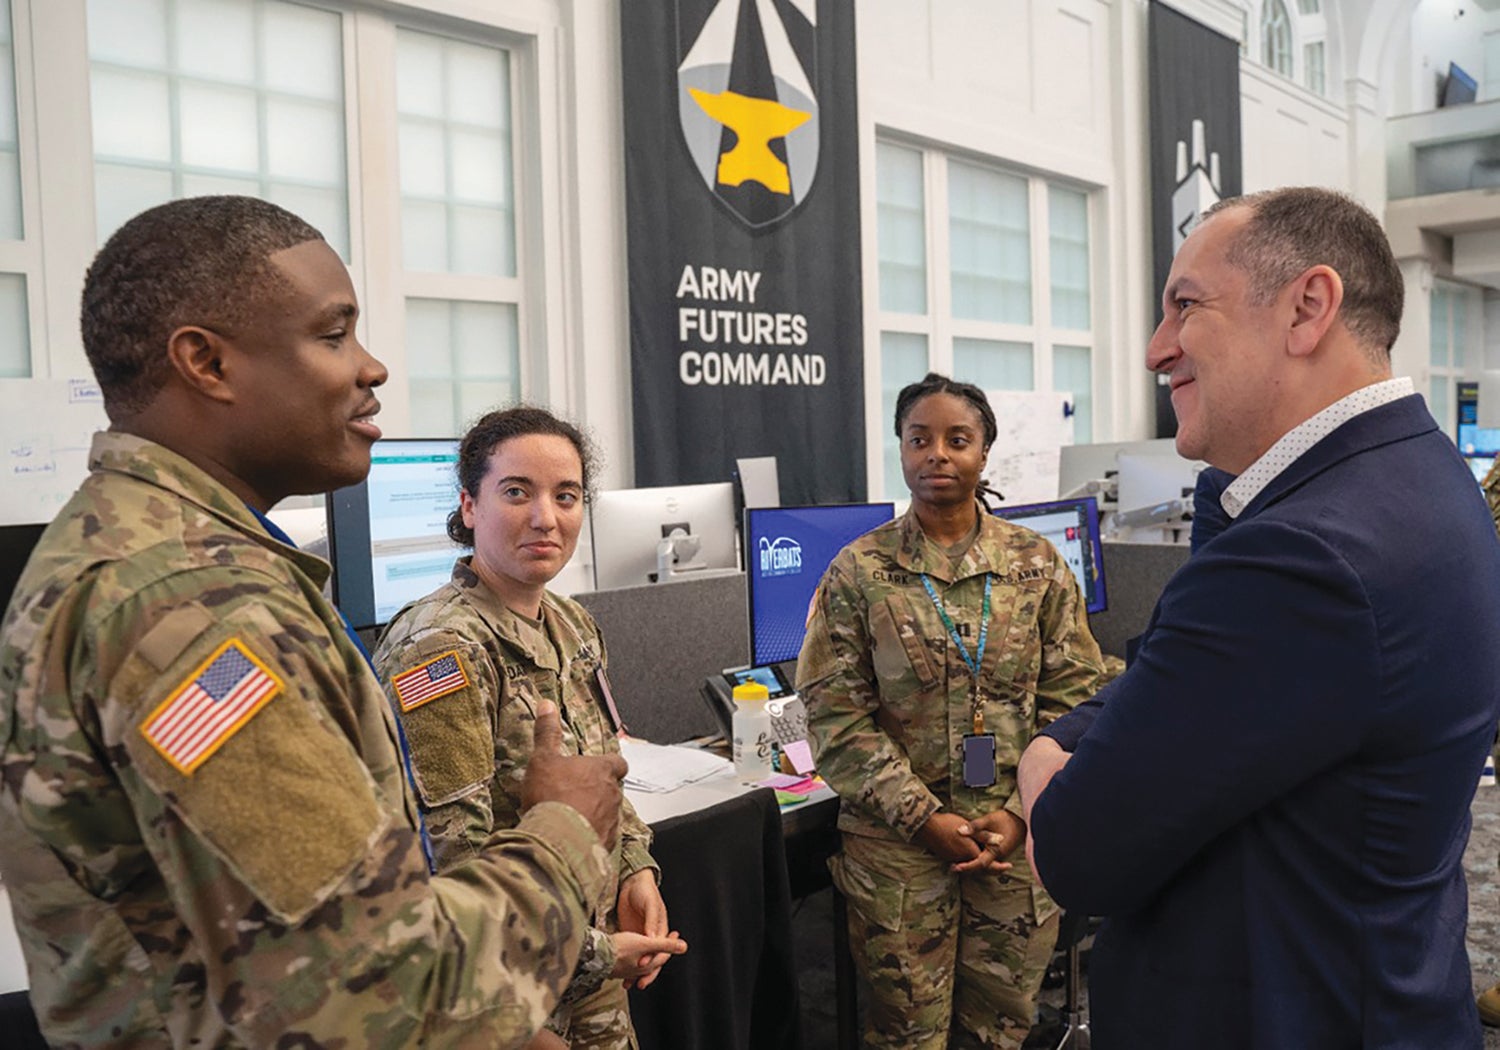 Members of the Software Factory discuss their work with Army Undersecretary Gabe Camarillo, right. (Credit: U.S. Army/Austin Thomas)